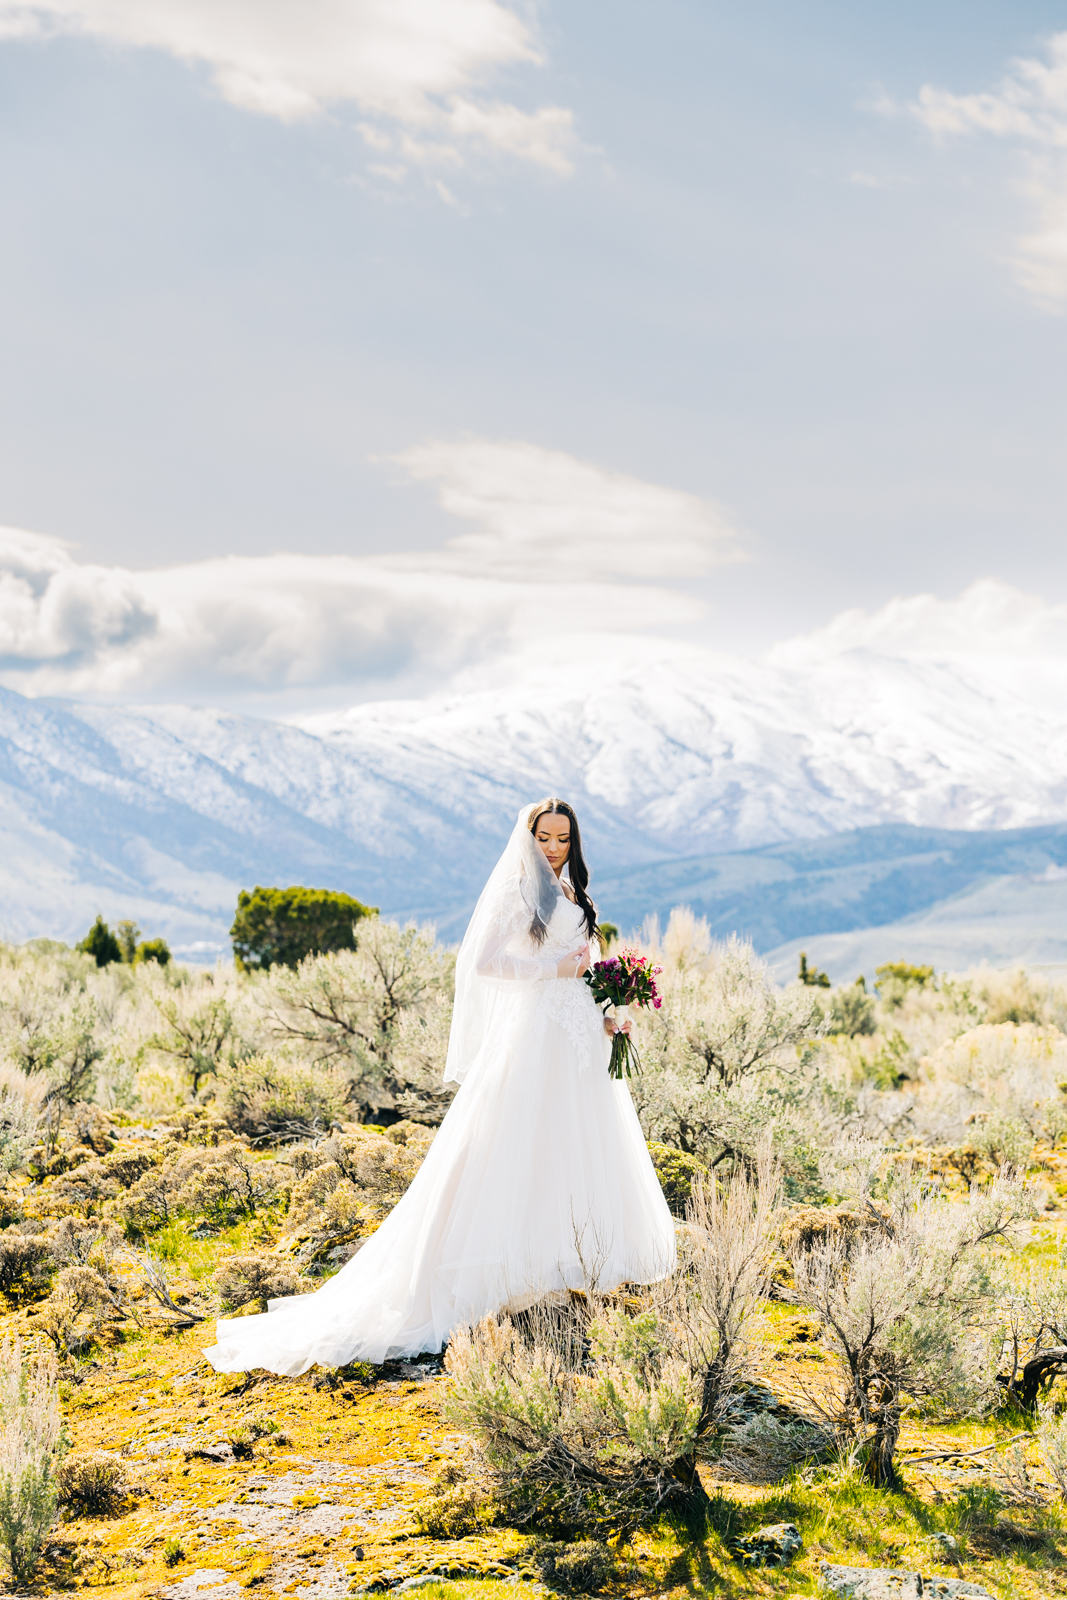 Jackson Hole wedding photographer captures bride with veil in sunlight with mountains in the background